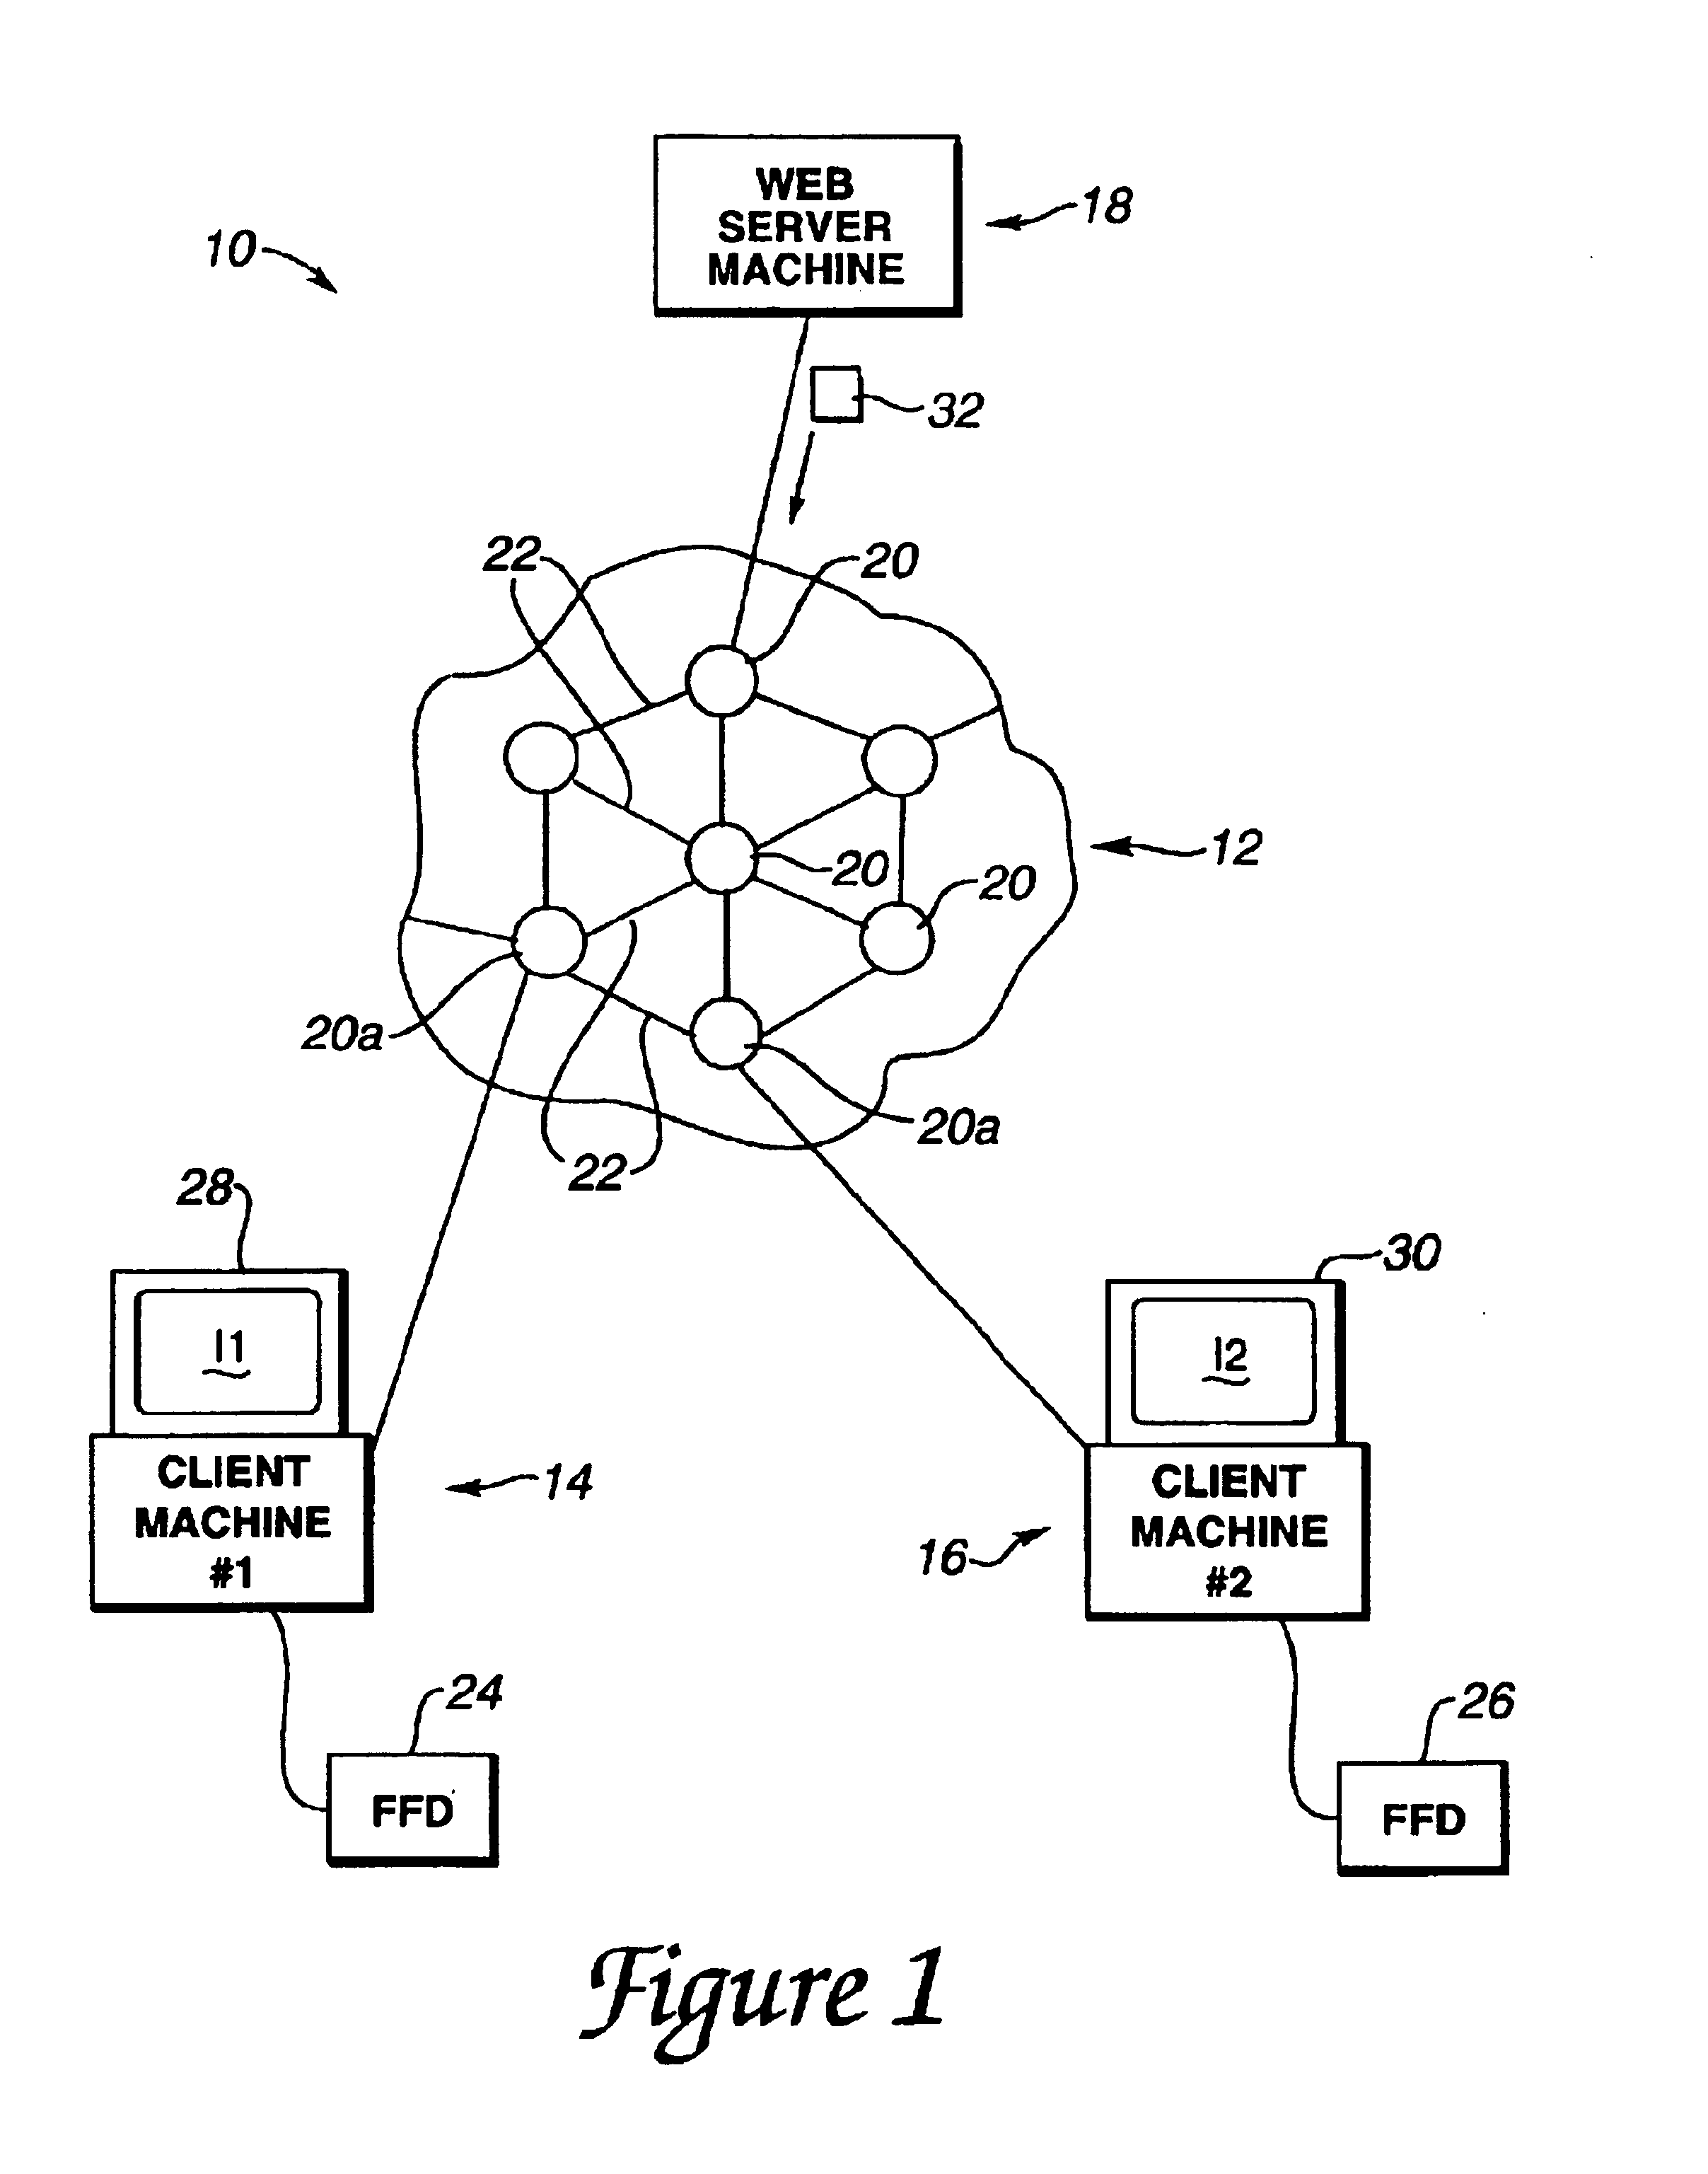 Force feedback enabled over a computer network